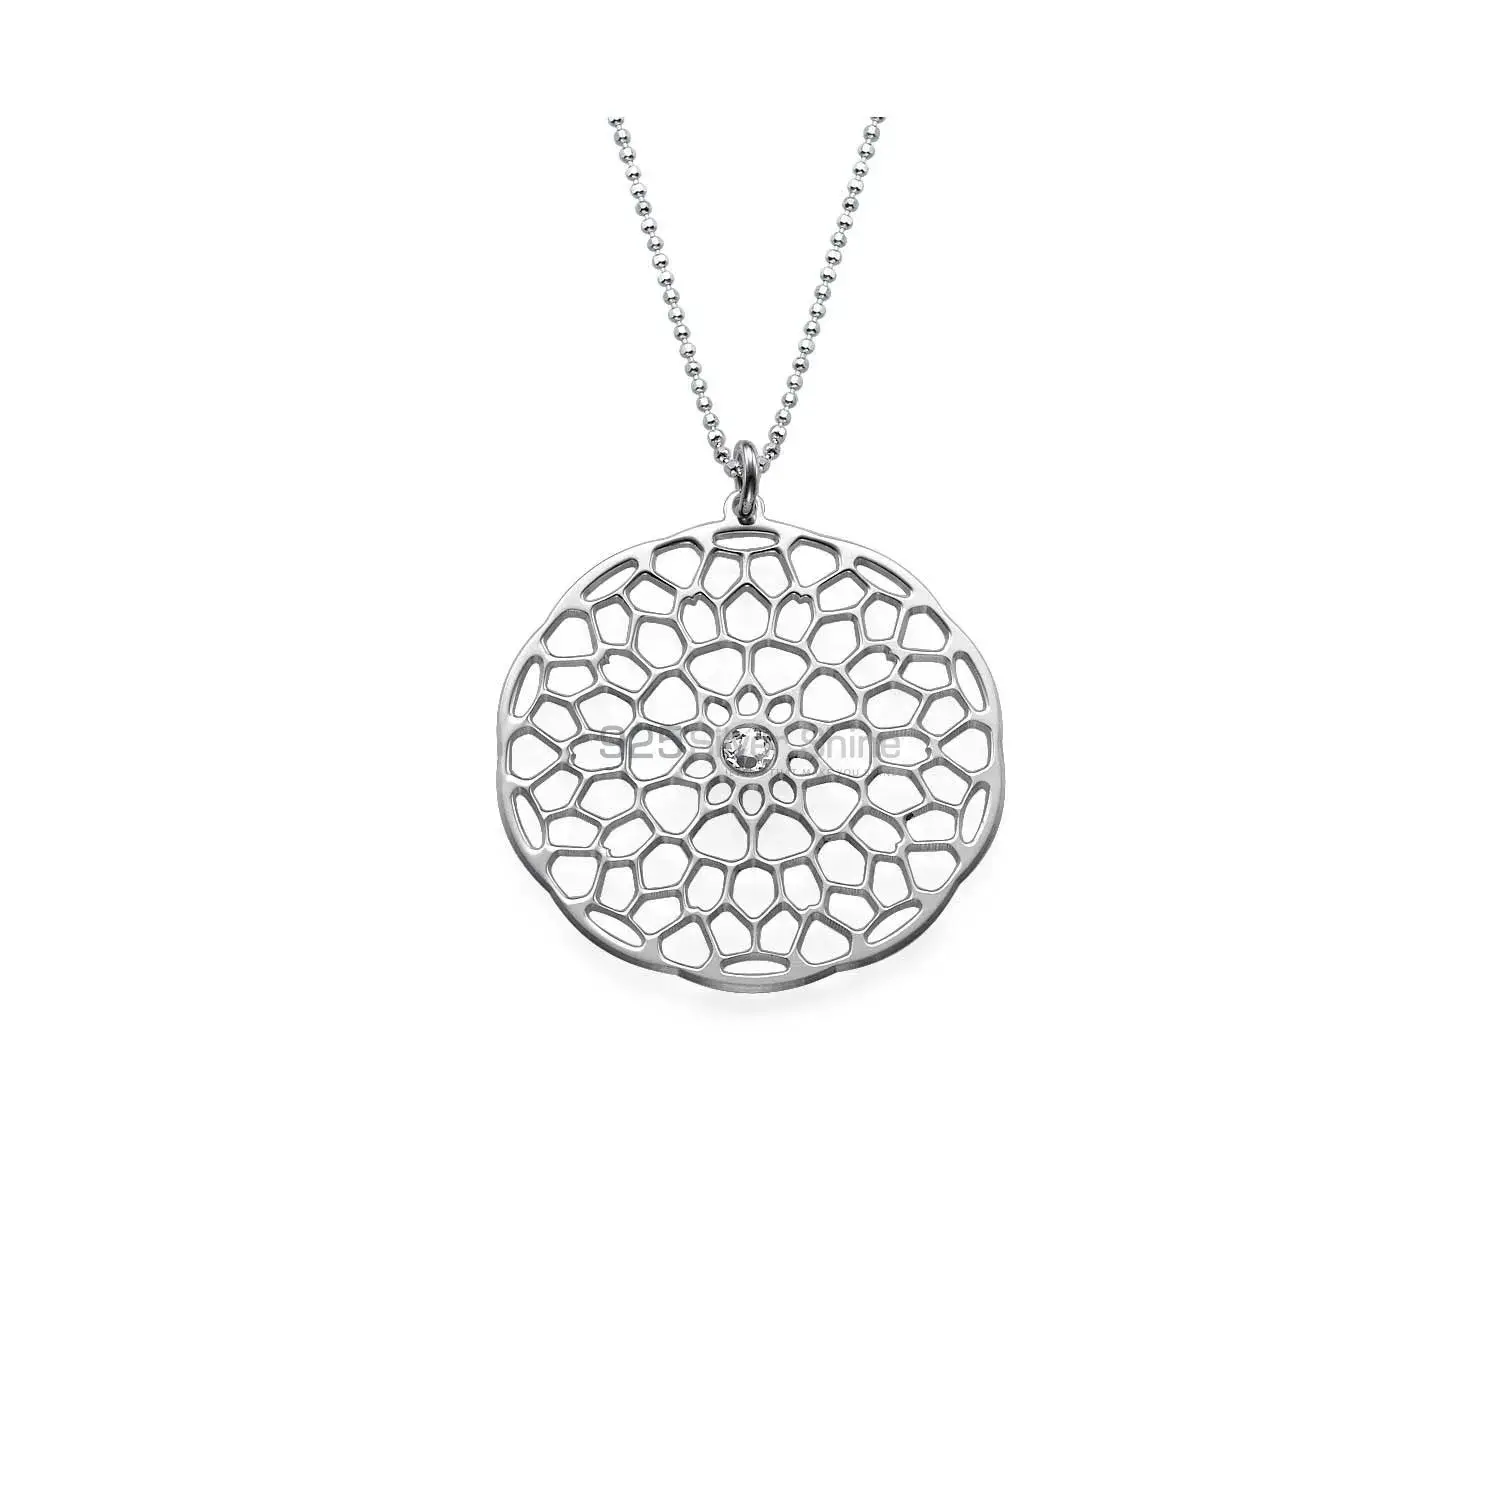 Maze Mandala Pendant in Sterling Silver With Crystal Stone 925MN126